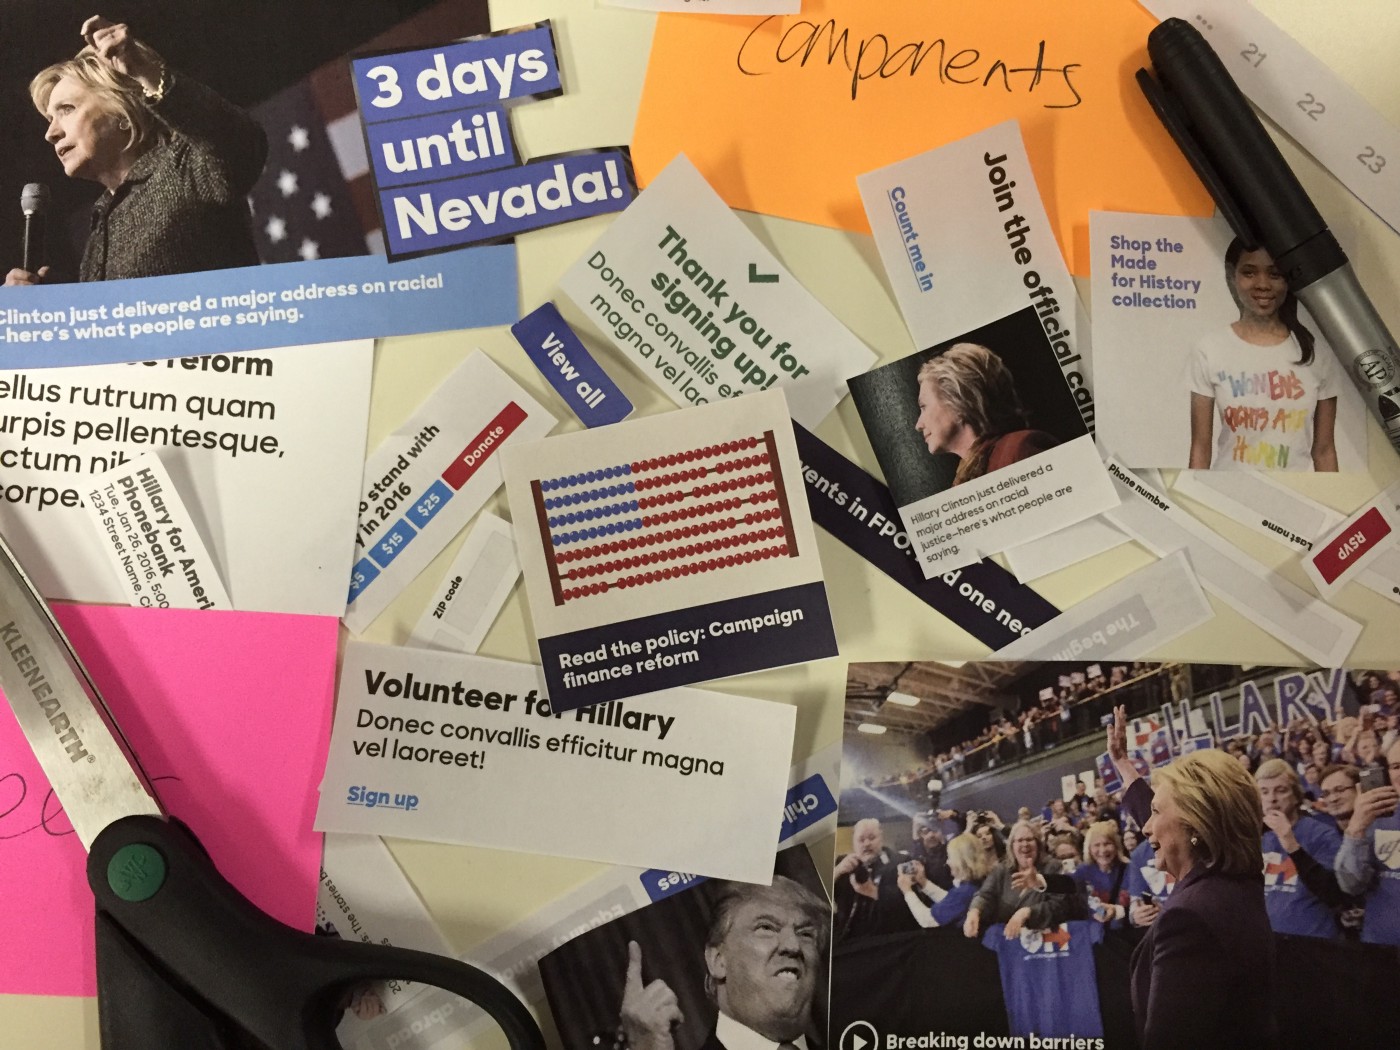 Design patterns from the Hillary campaign,
printed on paper, cut apart,
and labeled with sticky notes
